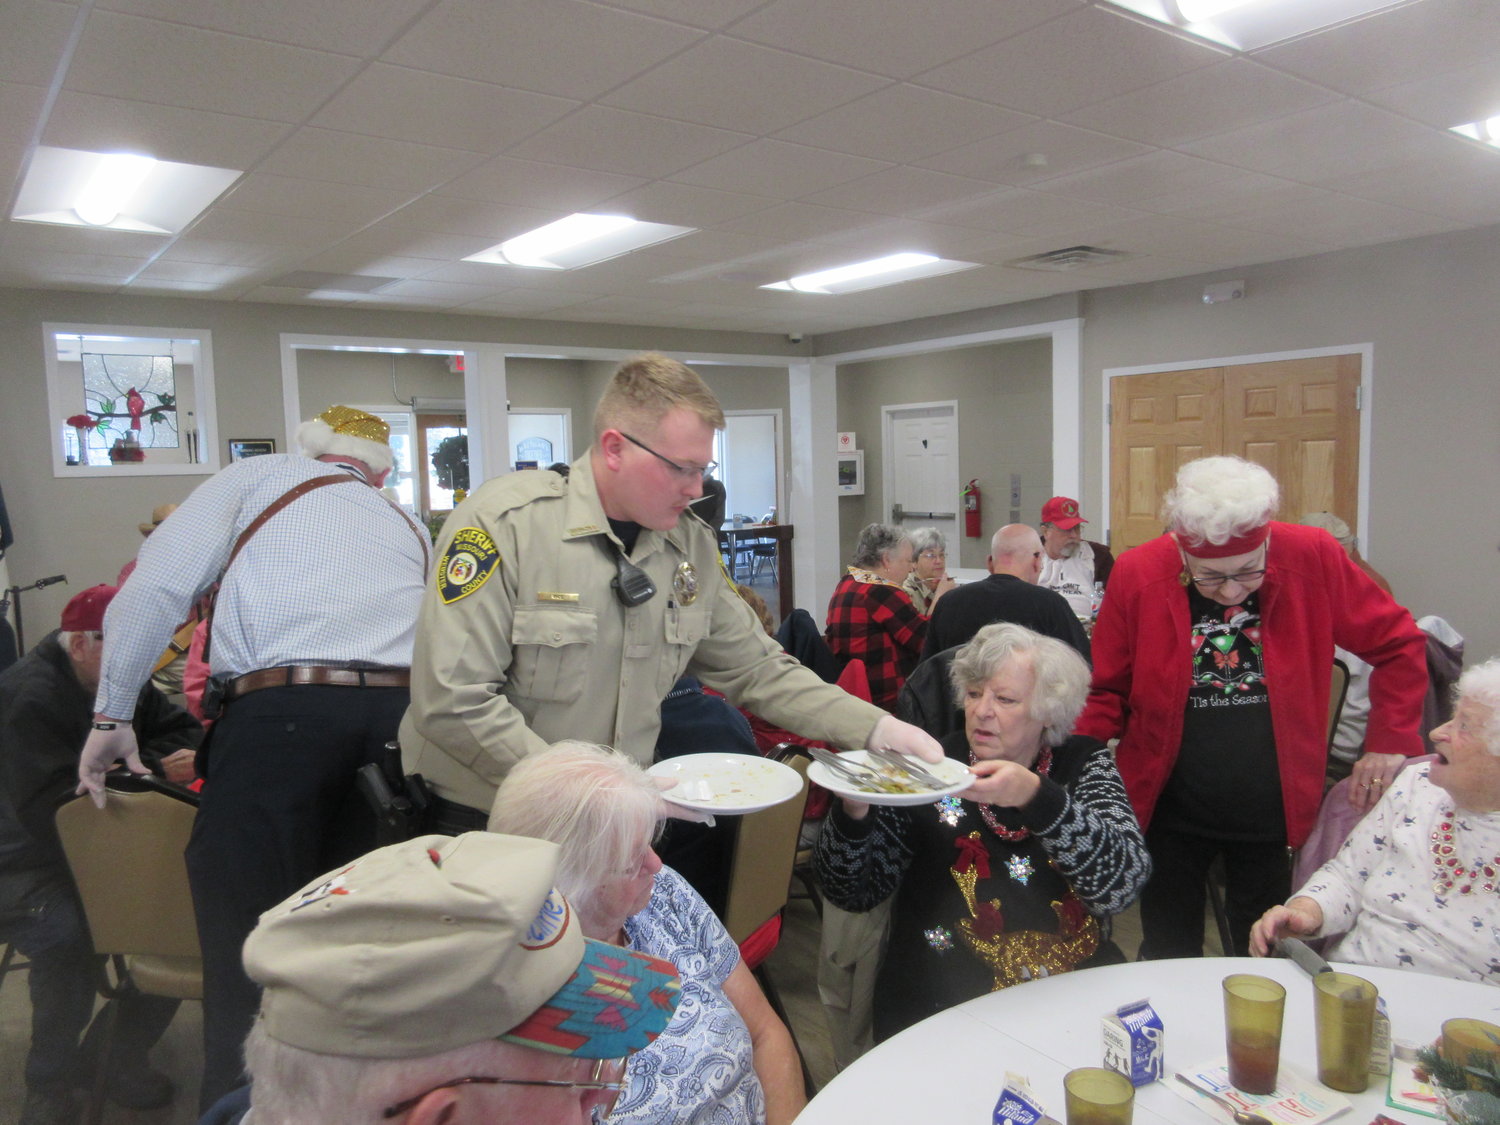 Deputy Austin Rice pictured bussing tables after the Christmas meal.